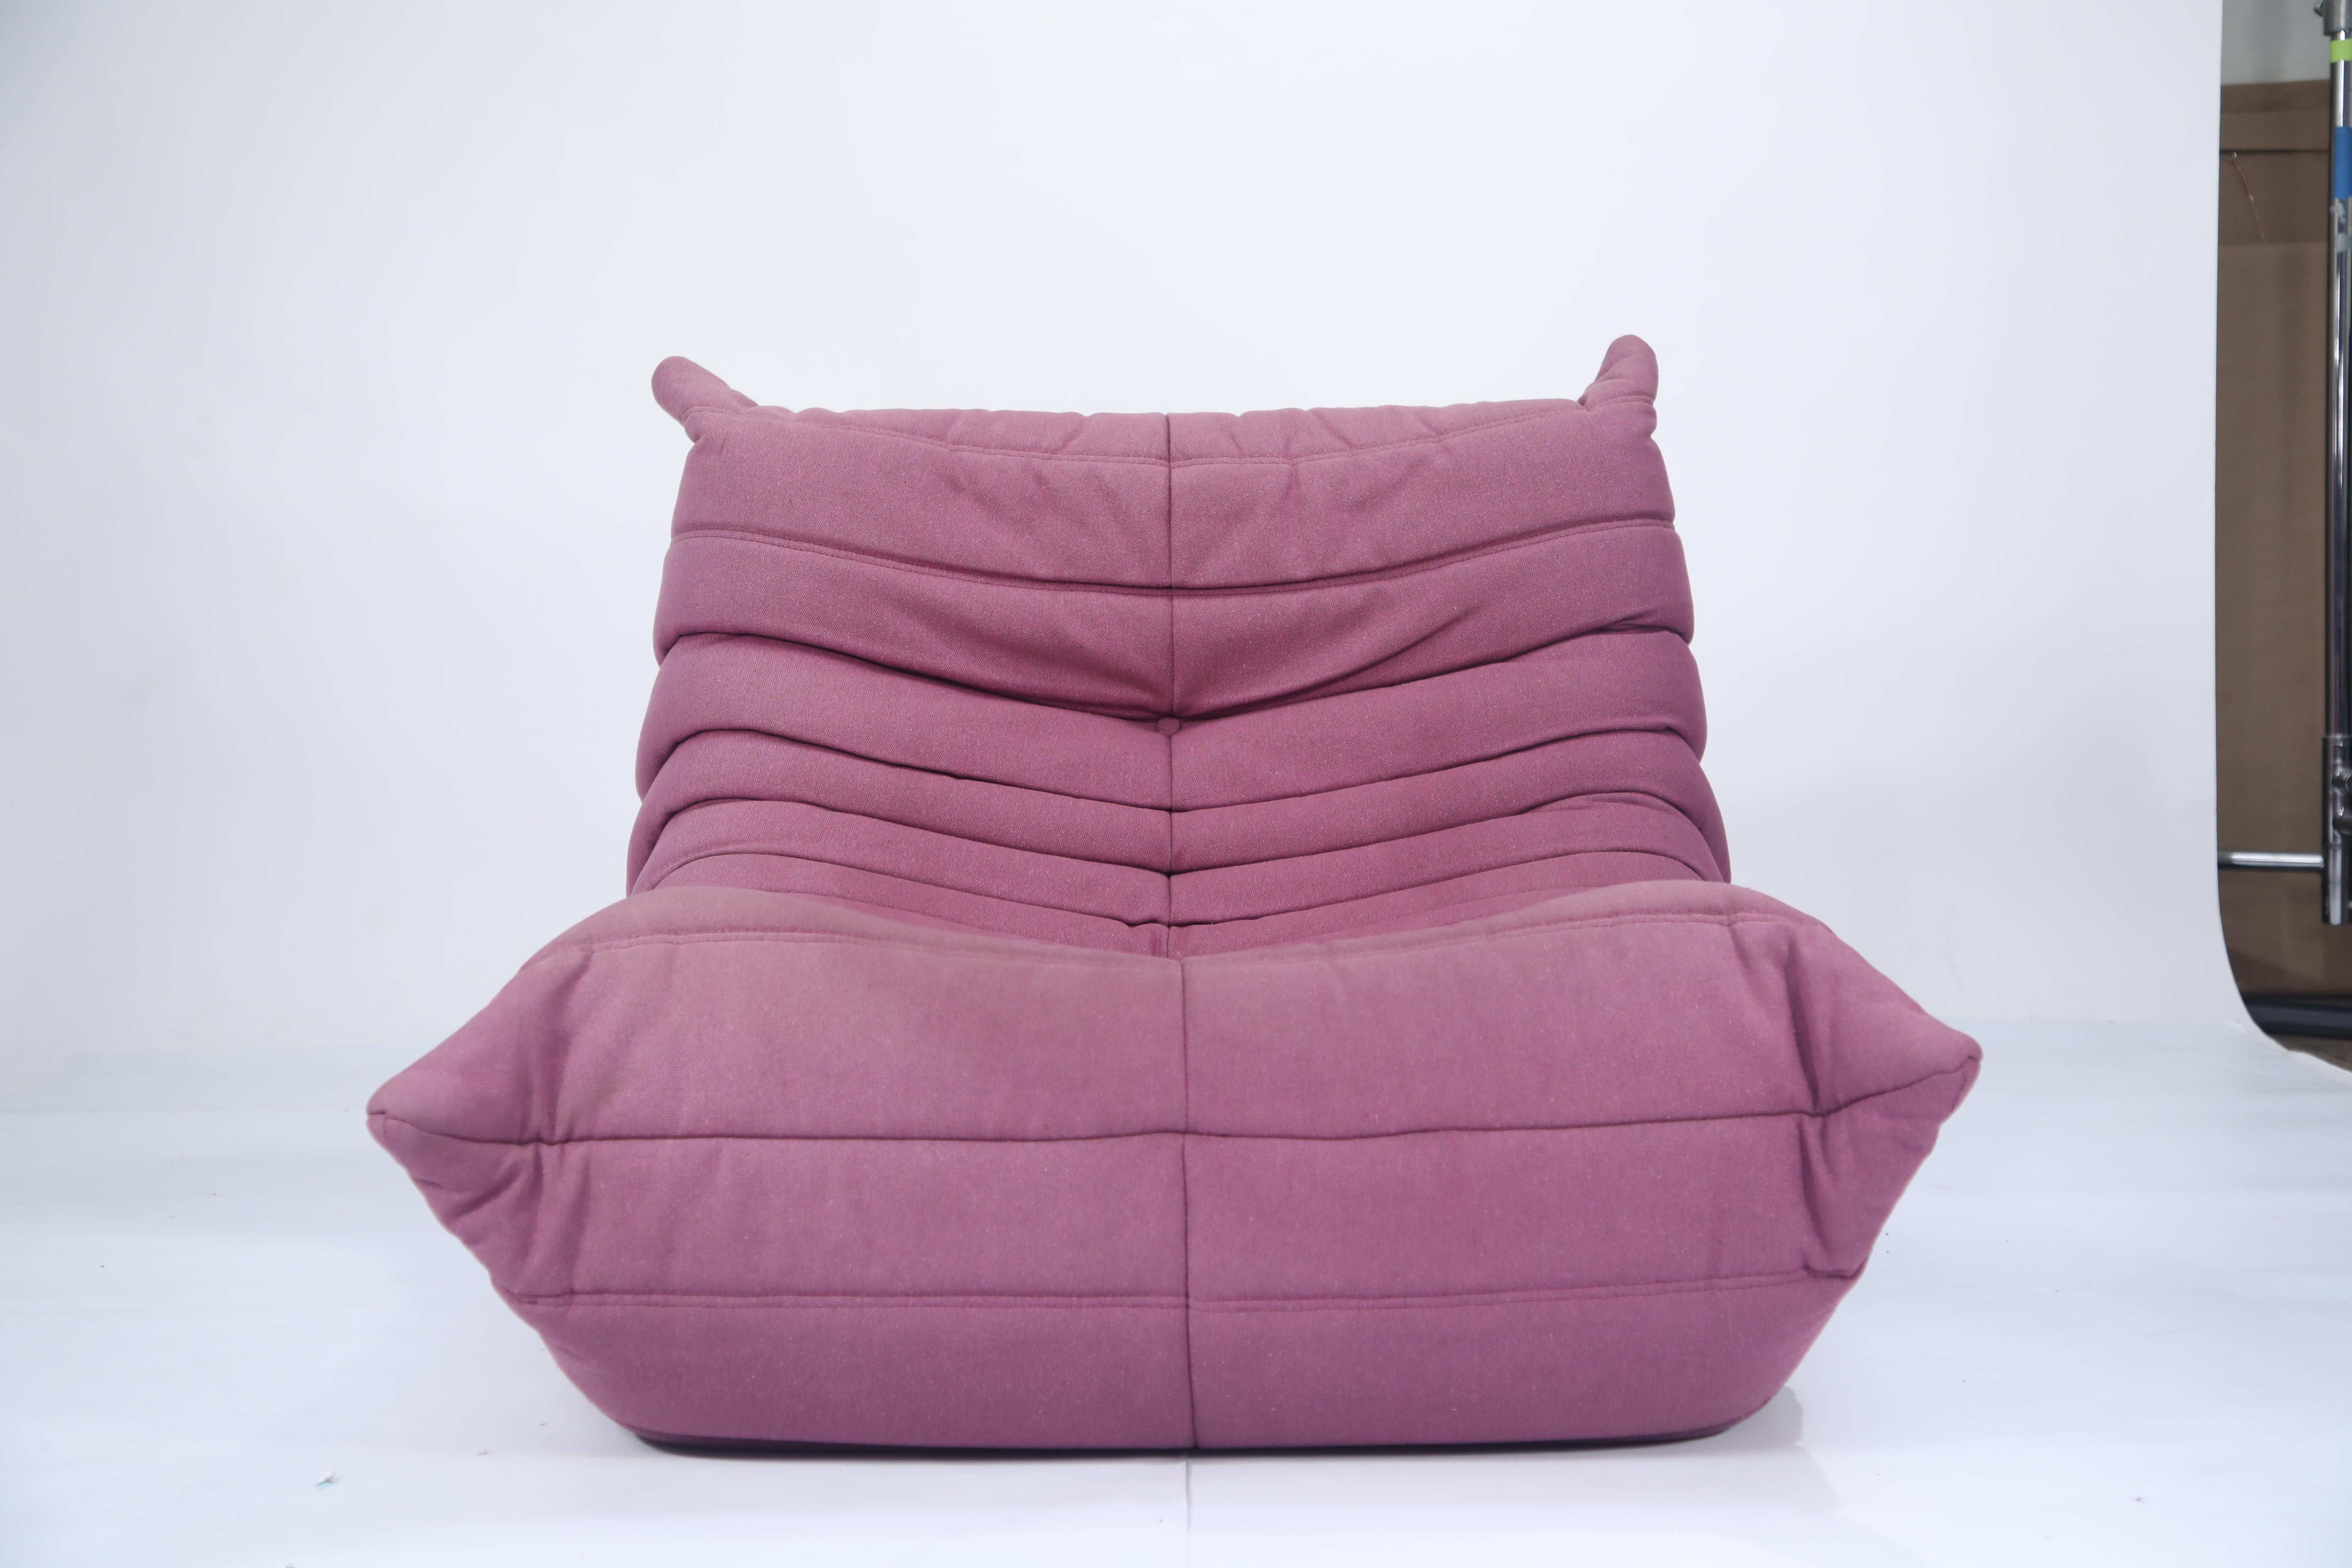 This timeless French design classic Togo lounge seat from Ligne Roset by Michel Ducaroy, designed in 1973, is upholstered in a gorgeous purple fabric. This classic ergonomic design, which is highly coveted by top designers, is produced with multiple